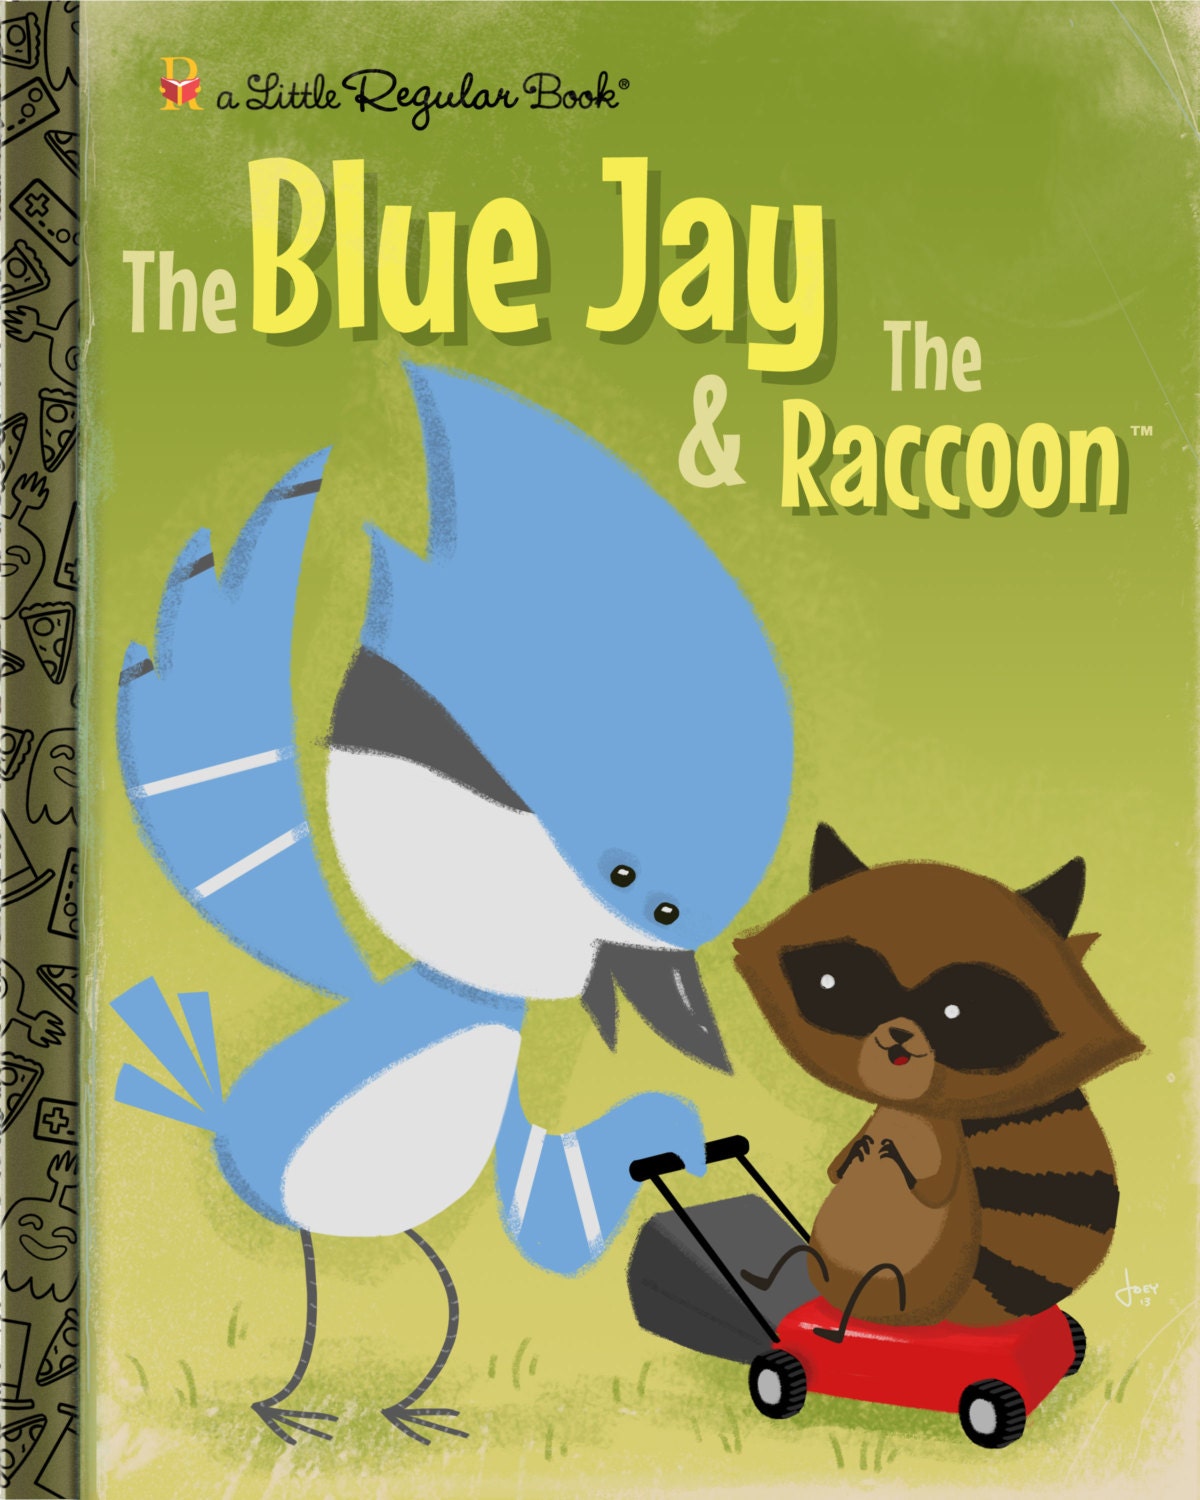 Raccoon And Blue Jay Tattoo - Design Options